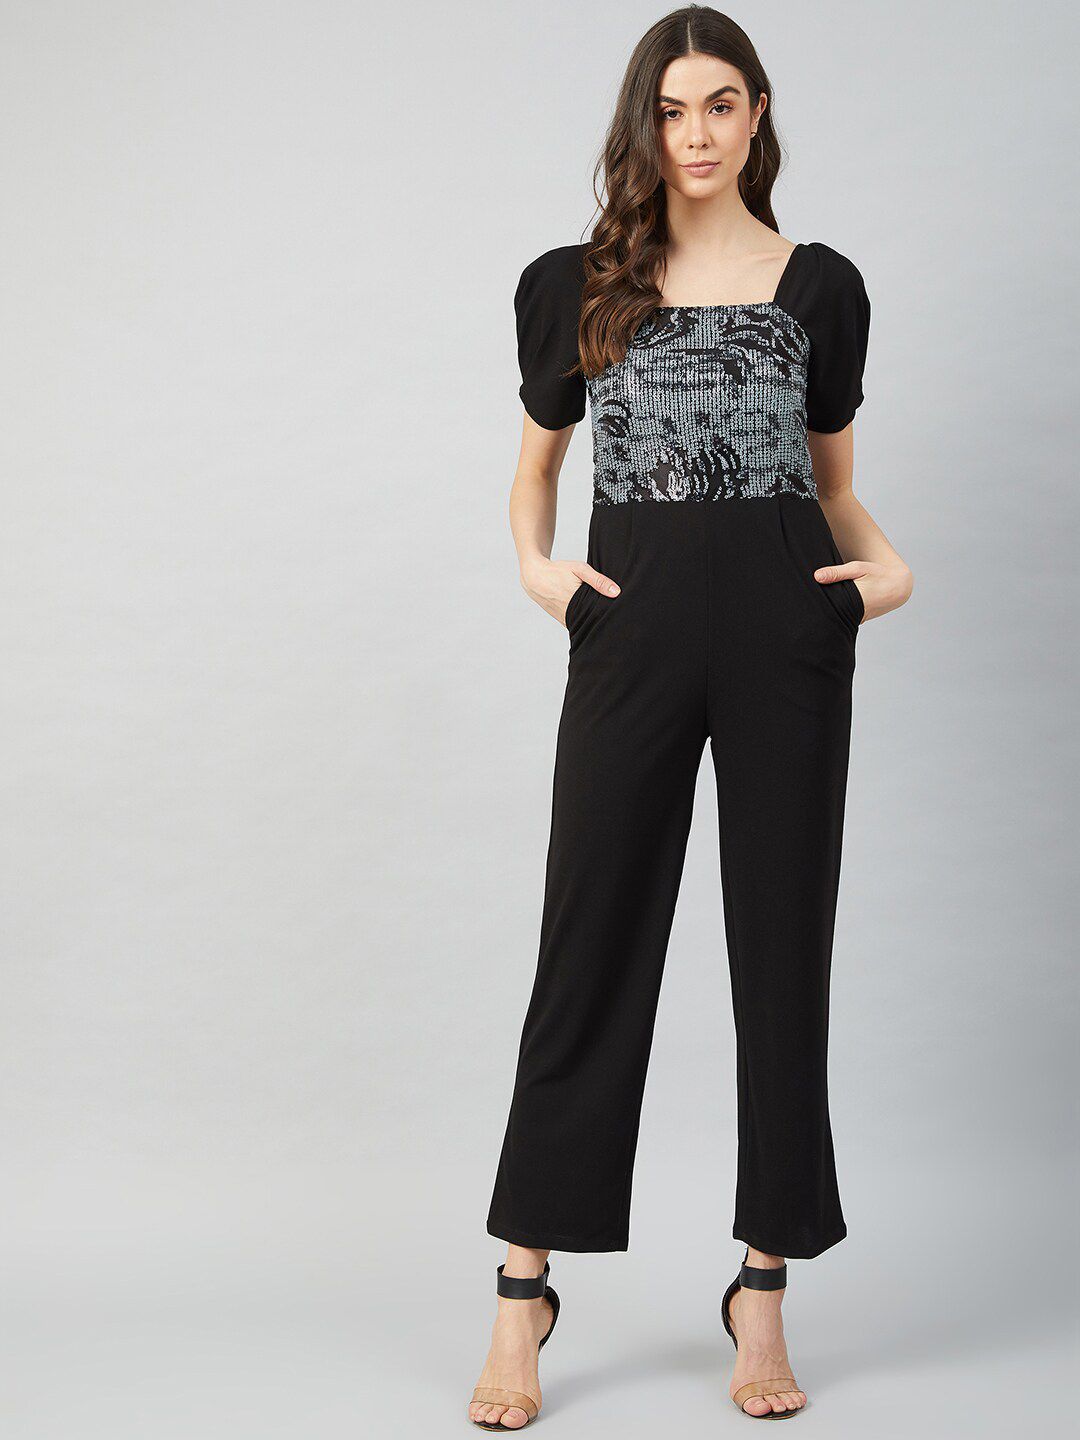 Athena Black & Silver-Toned Printed Basic Jumpsuit with Embellished Price in India